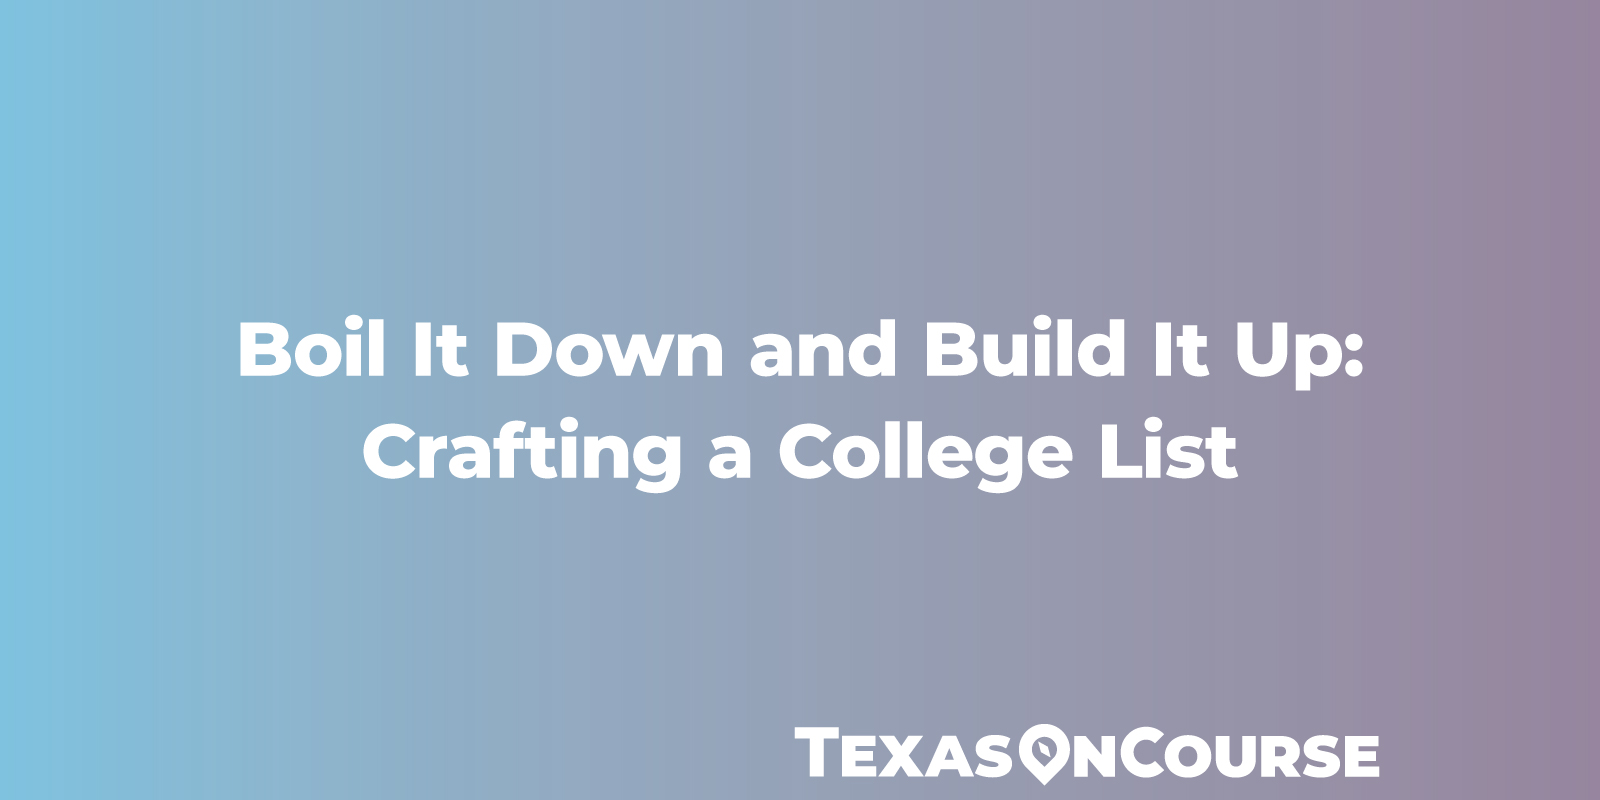 Boil It Down and Build It Up: Crafting a College List